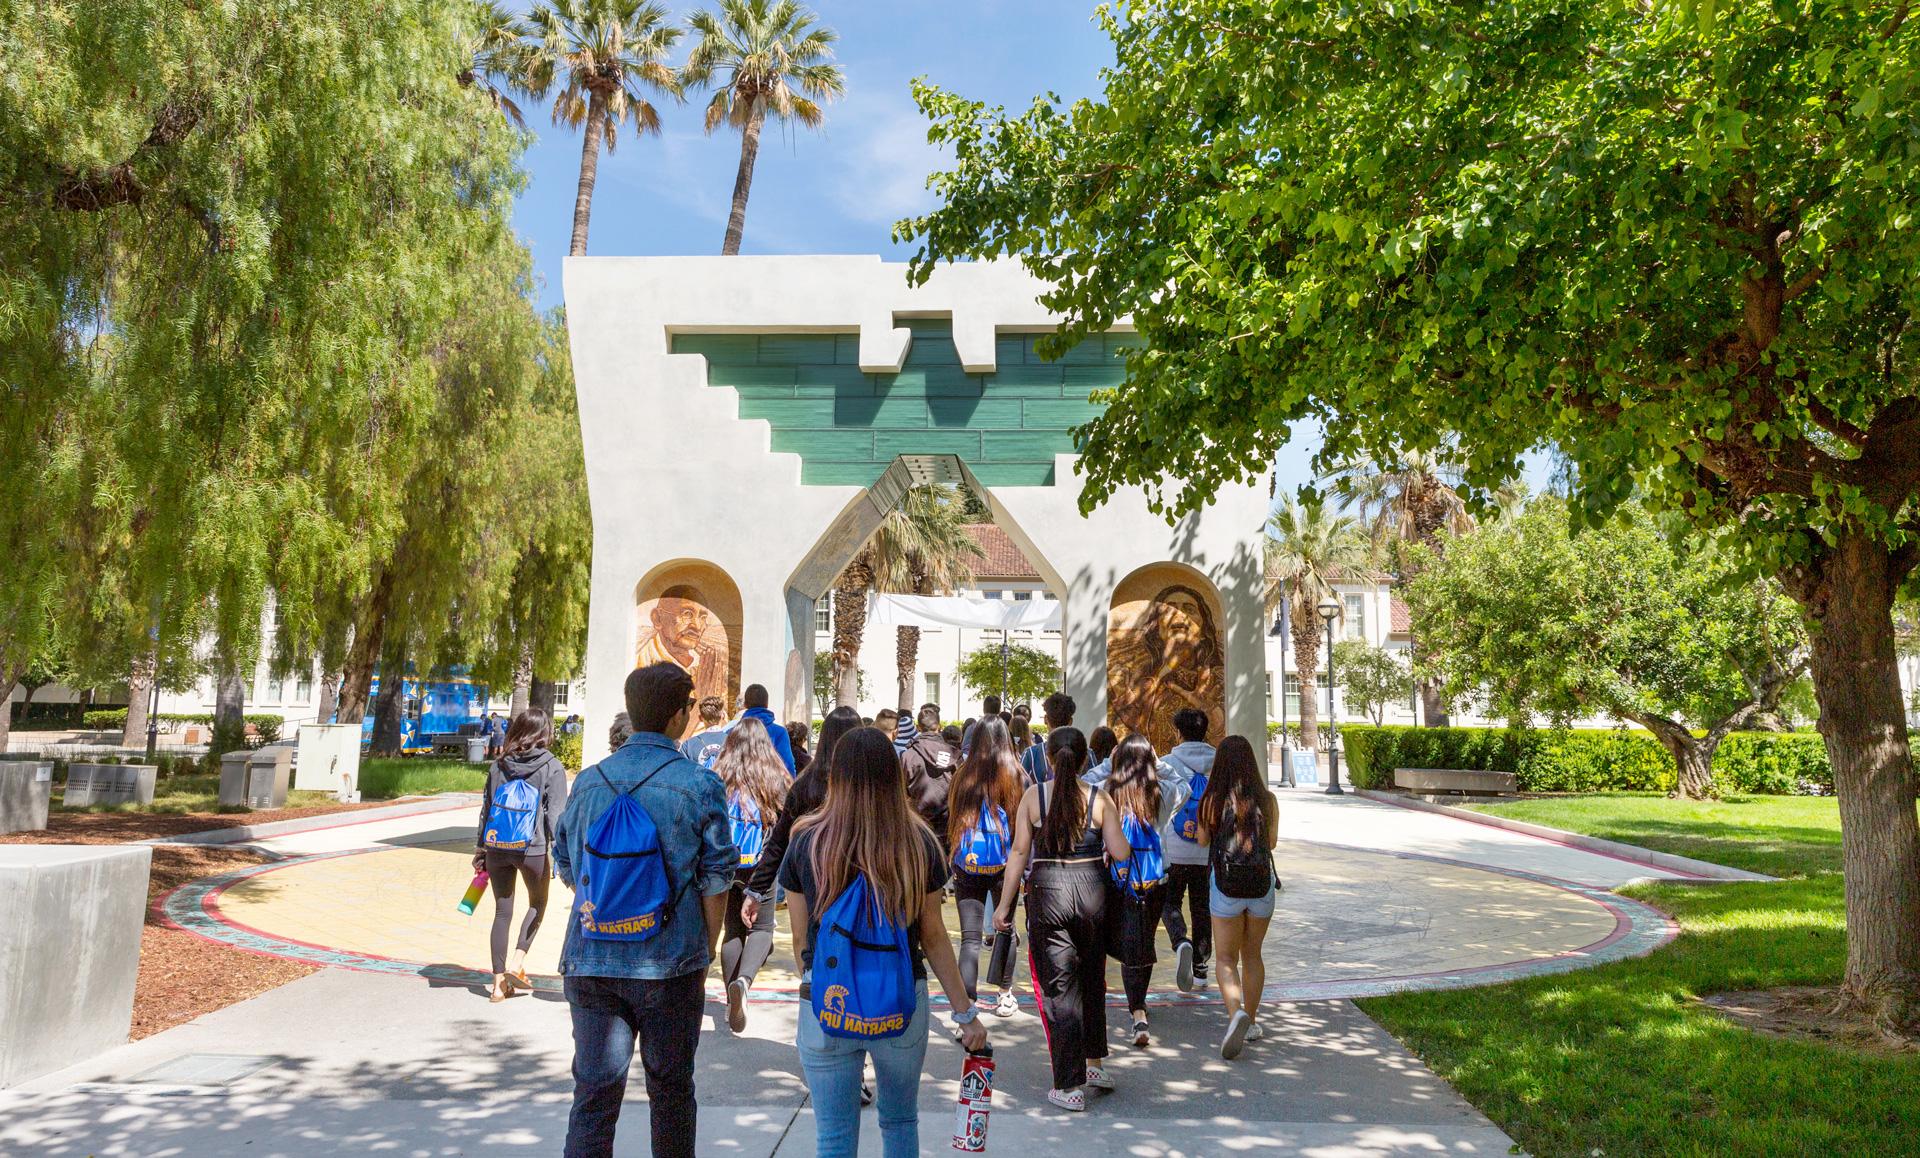 Students wearing 利记 gear are walking through the Cesar Chavez arch that is surrounded by bright green trees.